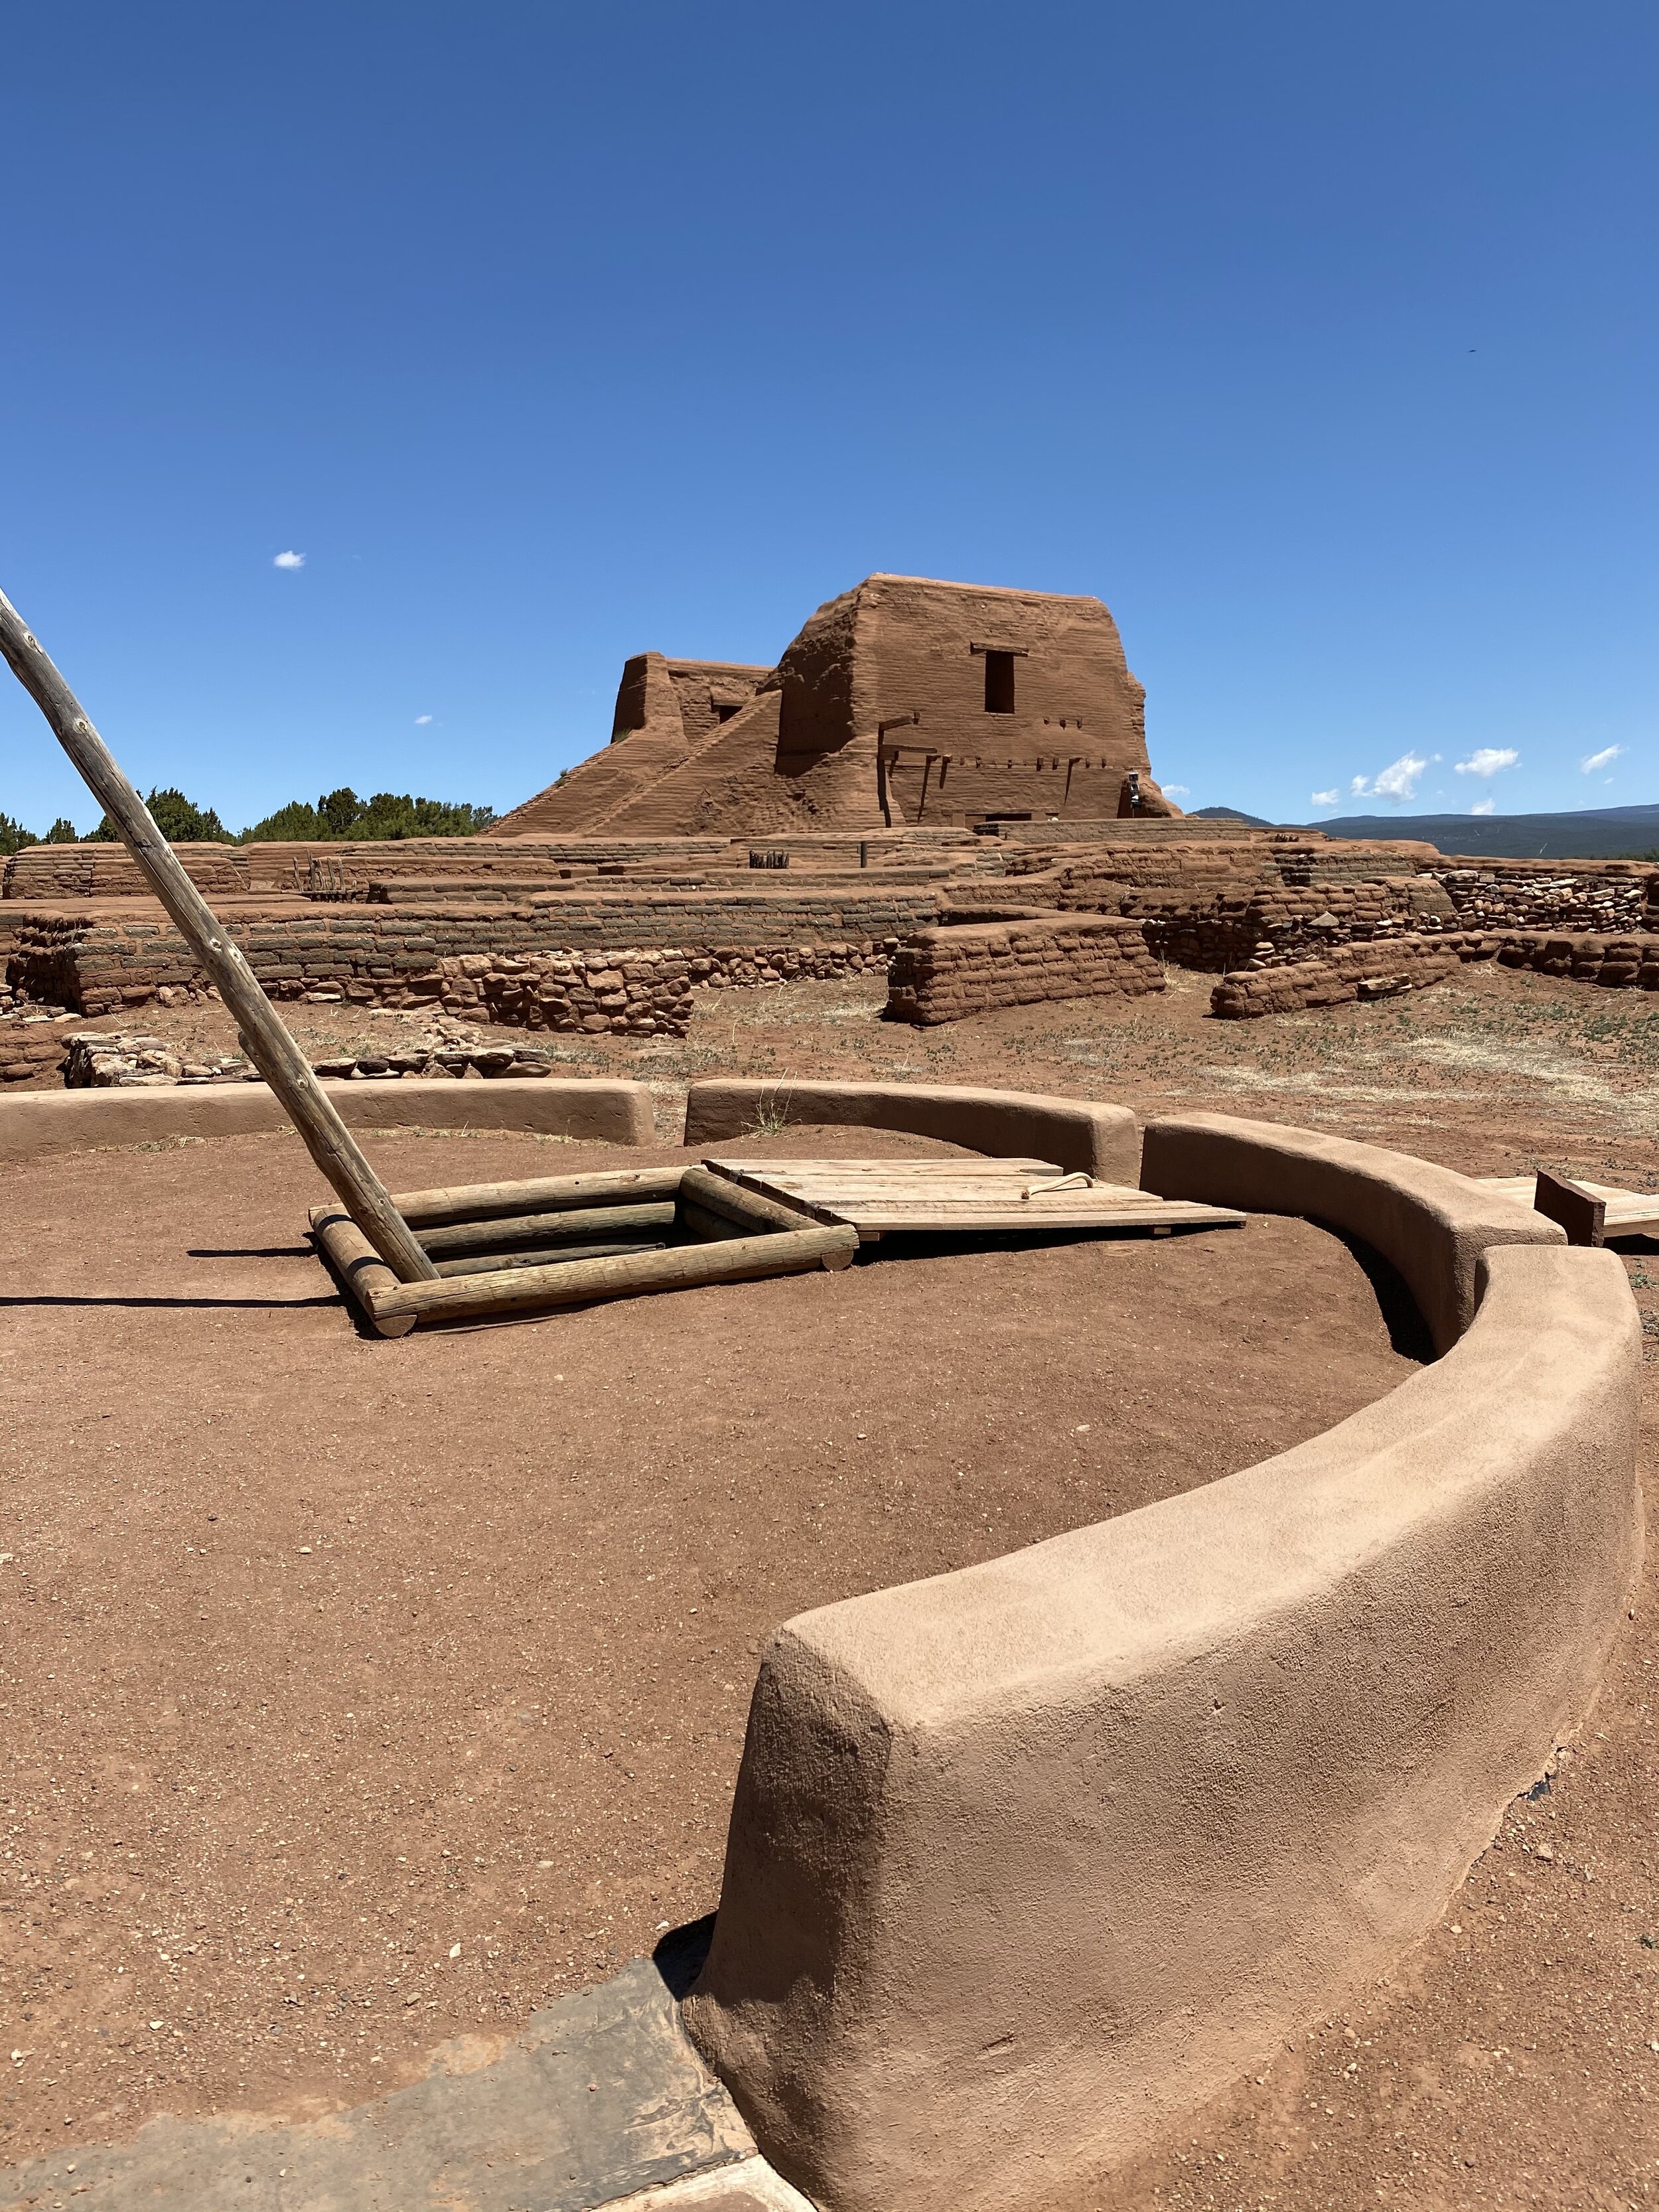 Kiva with view of the mission church in the background at Pecos National Historical Park